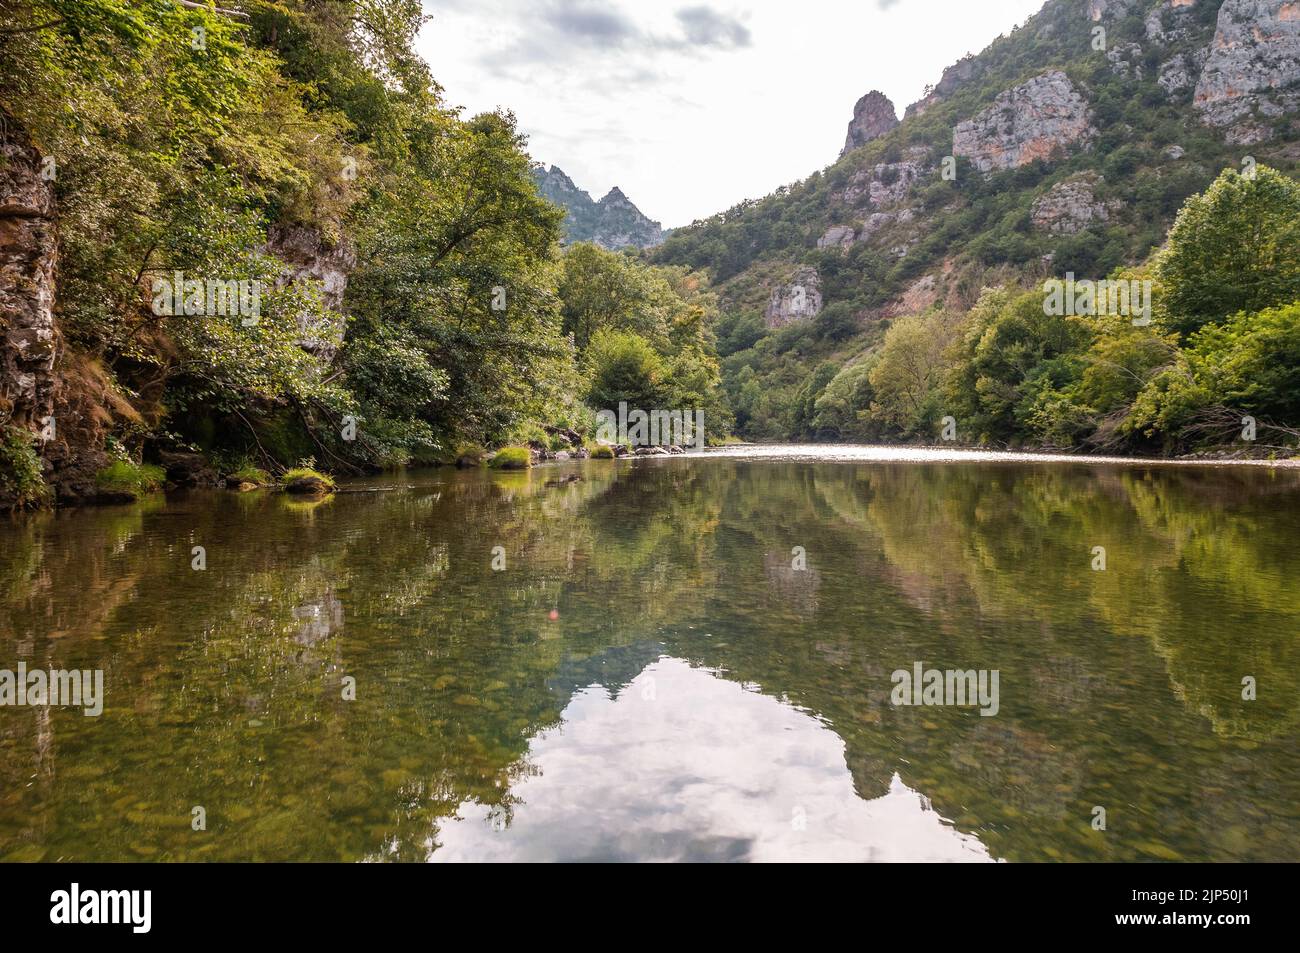 River and reflection, Gorges du Tarn, Lozere, France Stock Photo